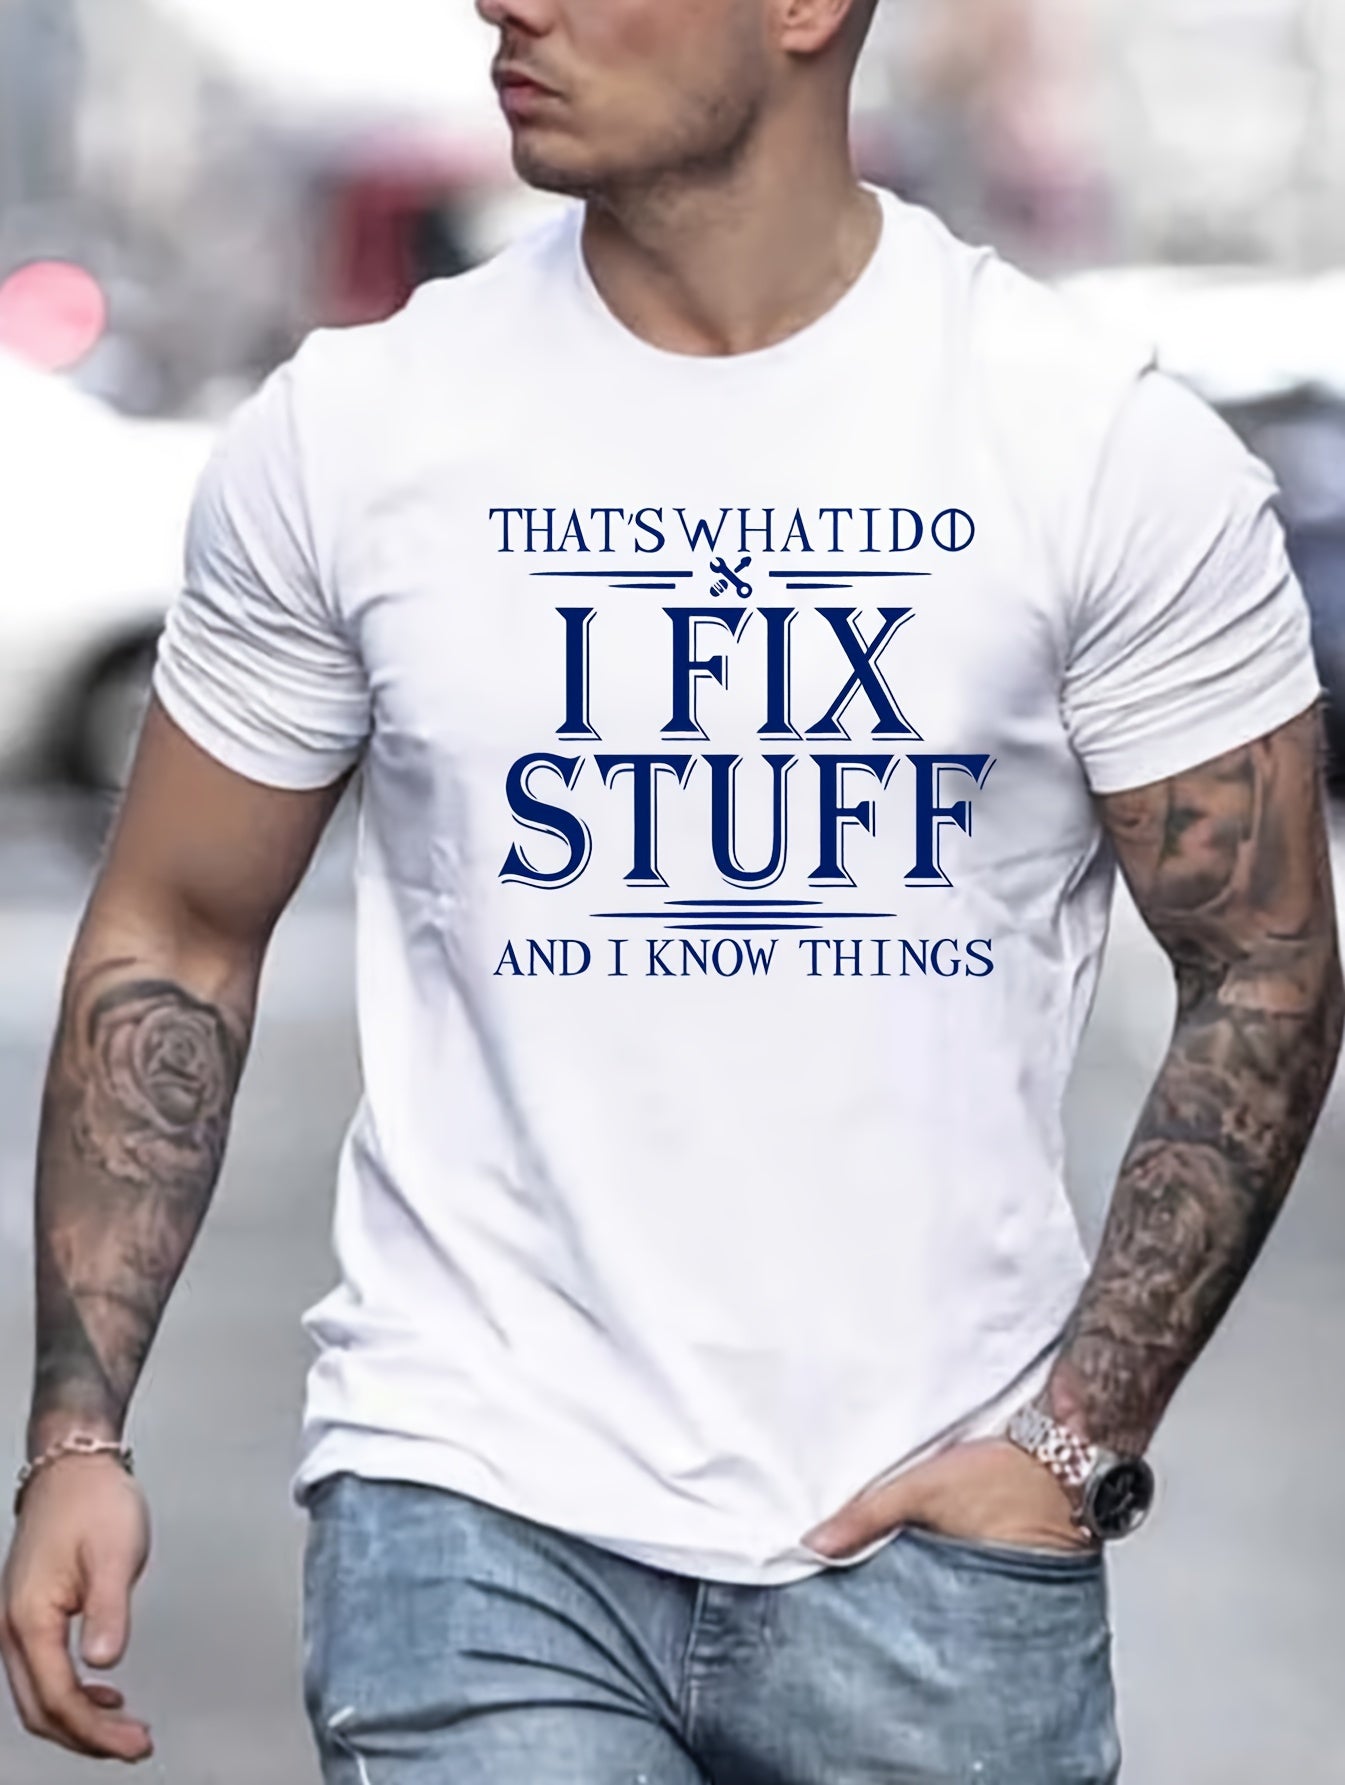 'I FIX STUFF' Round Neck Graphic T-shirts, Causal Tees, Short Sleeves Comfortable Tops, Men's Summer Clothing